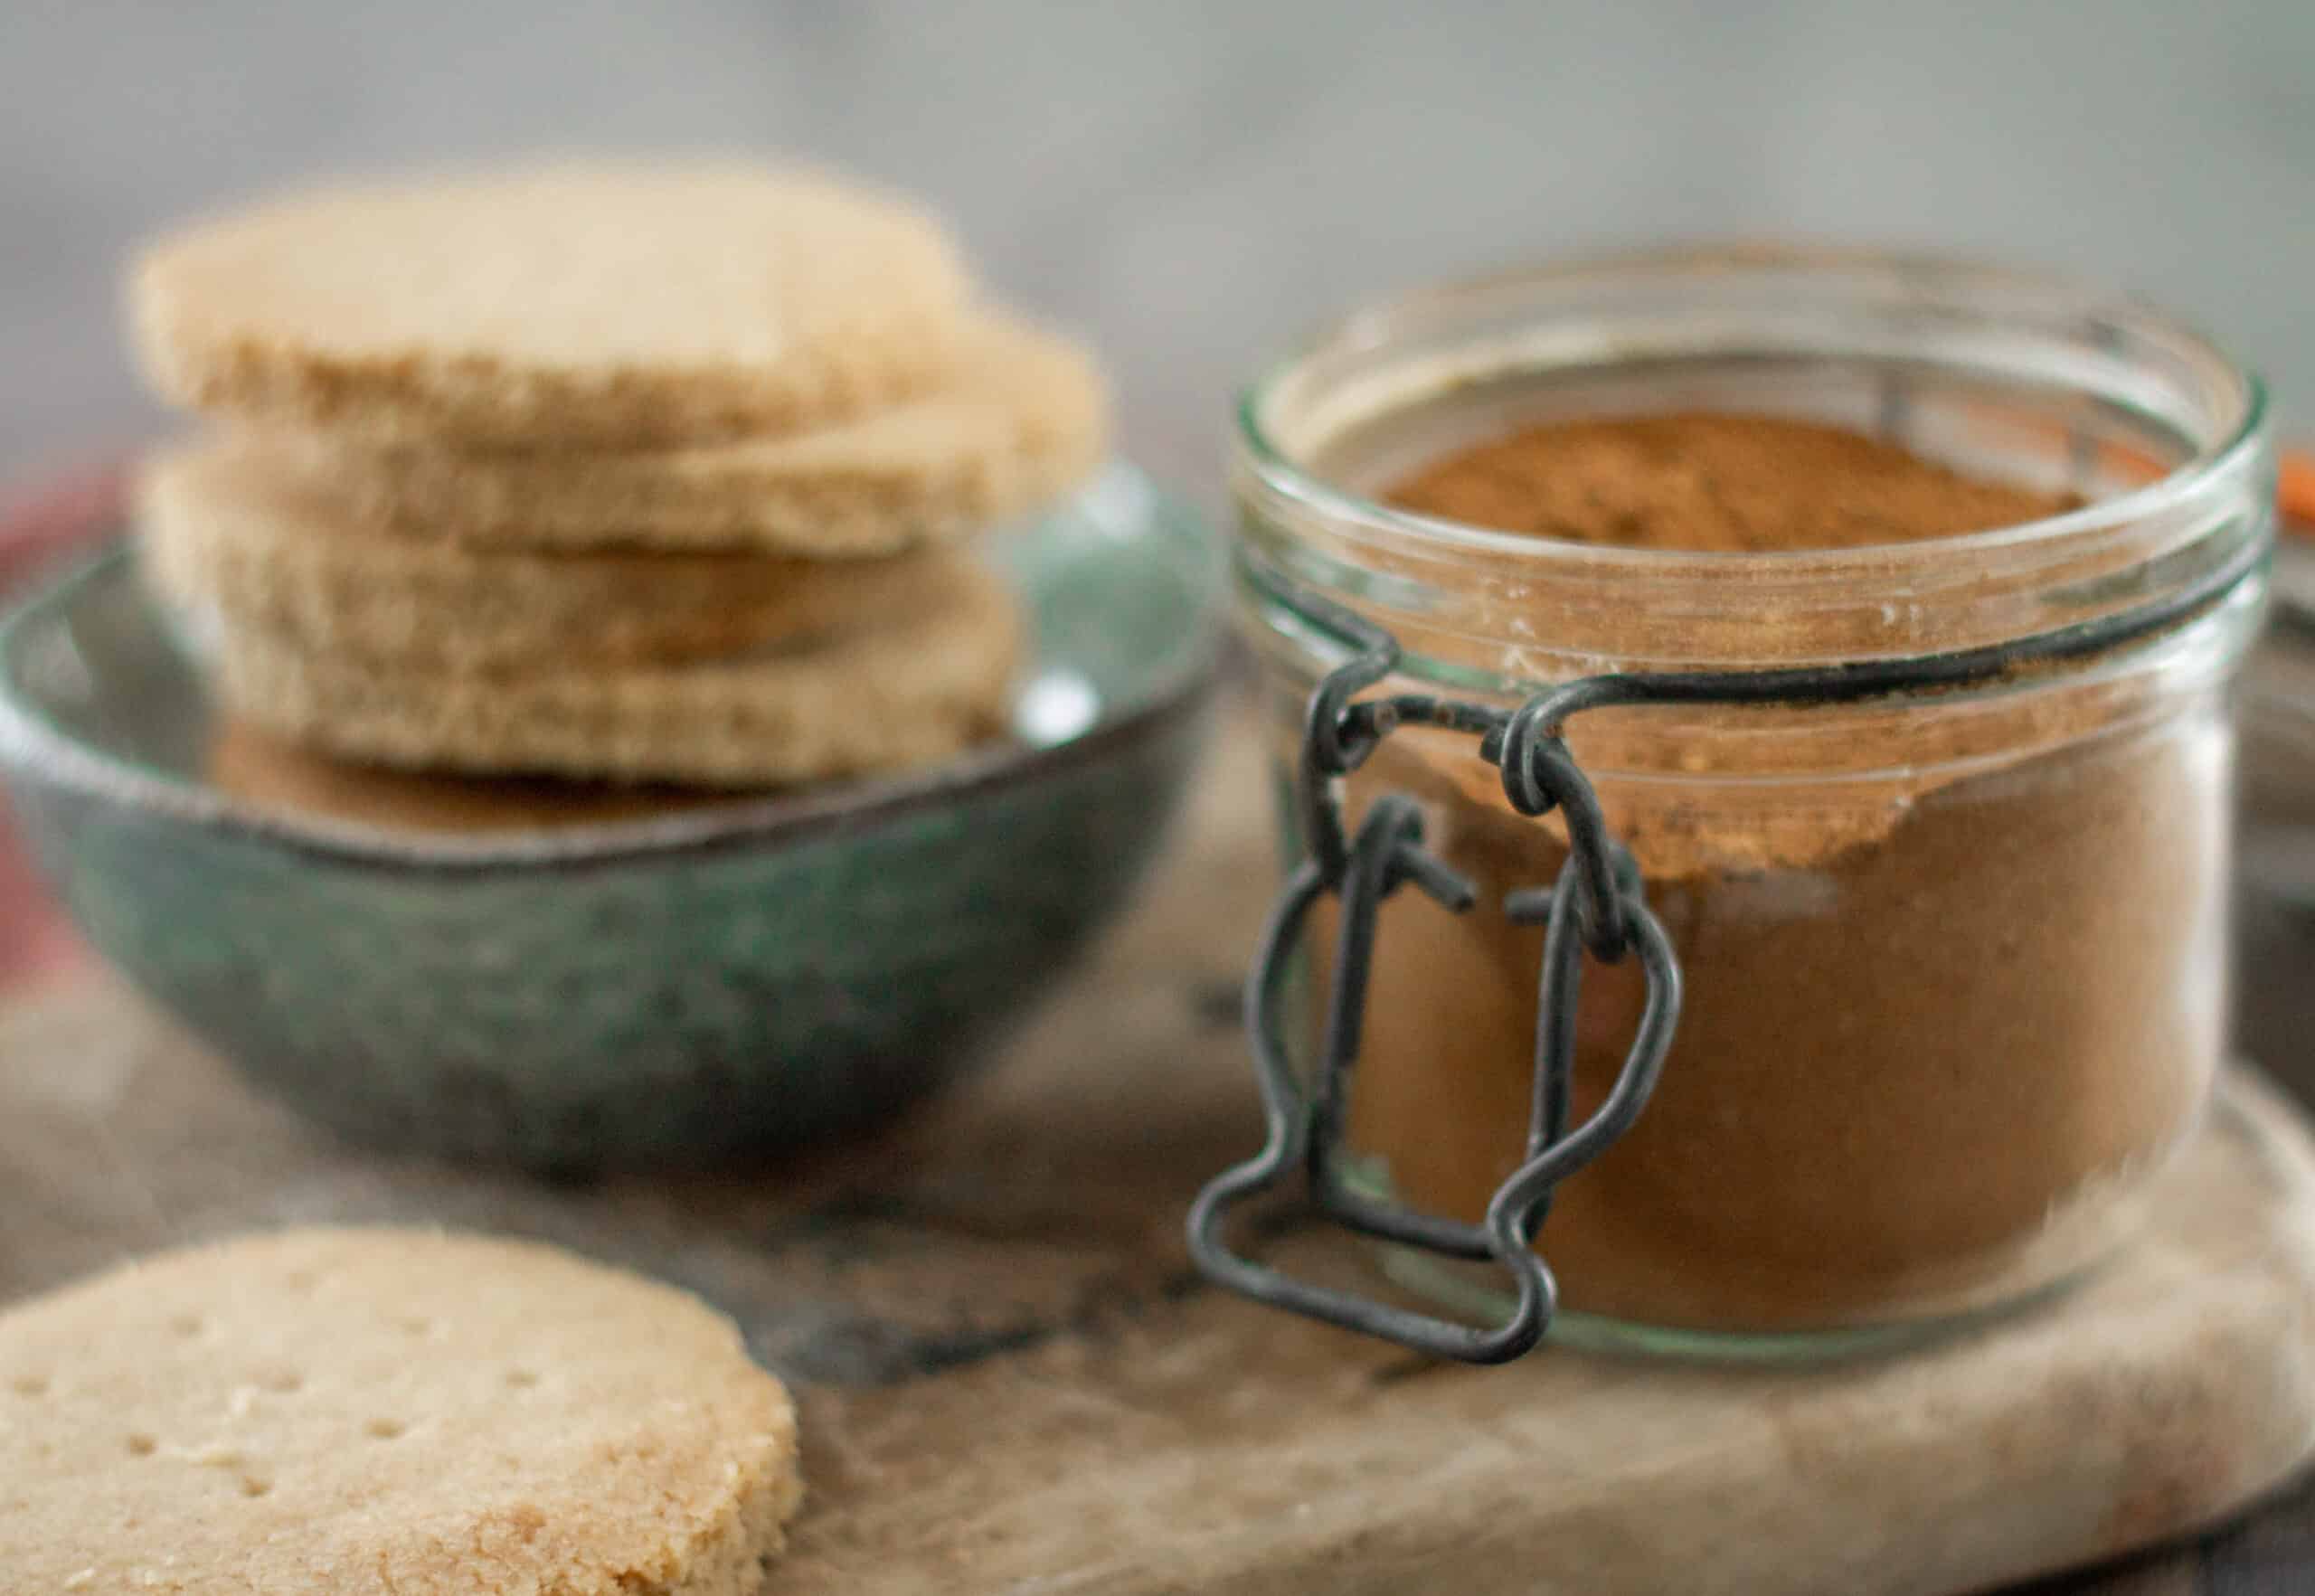 A jar of chai powder next to a stack of shortbread cookies